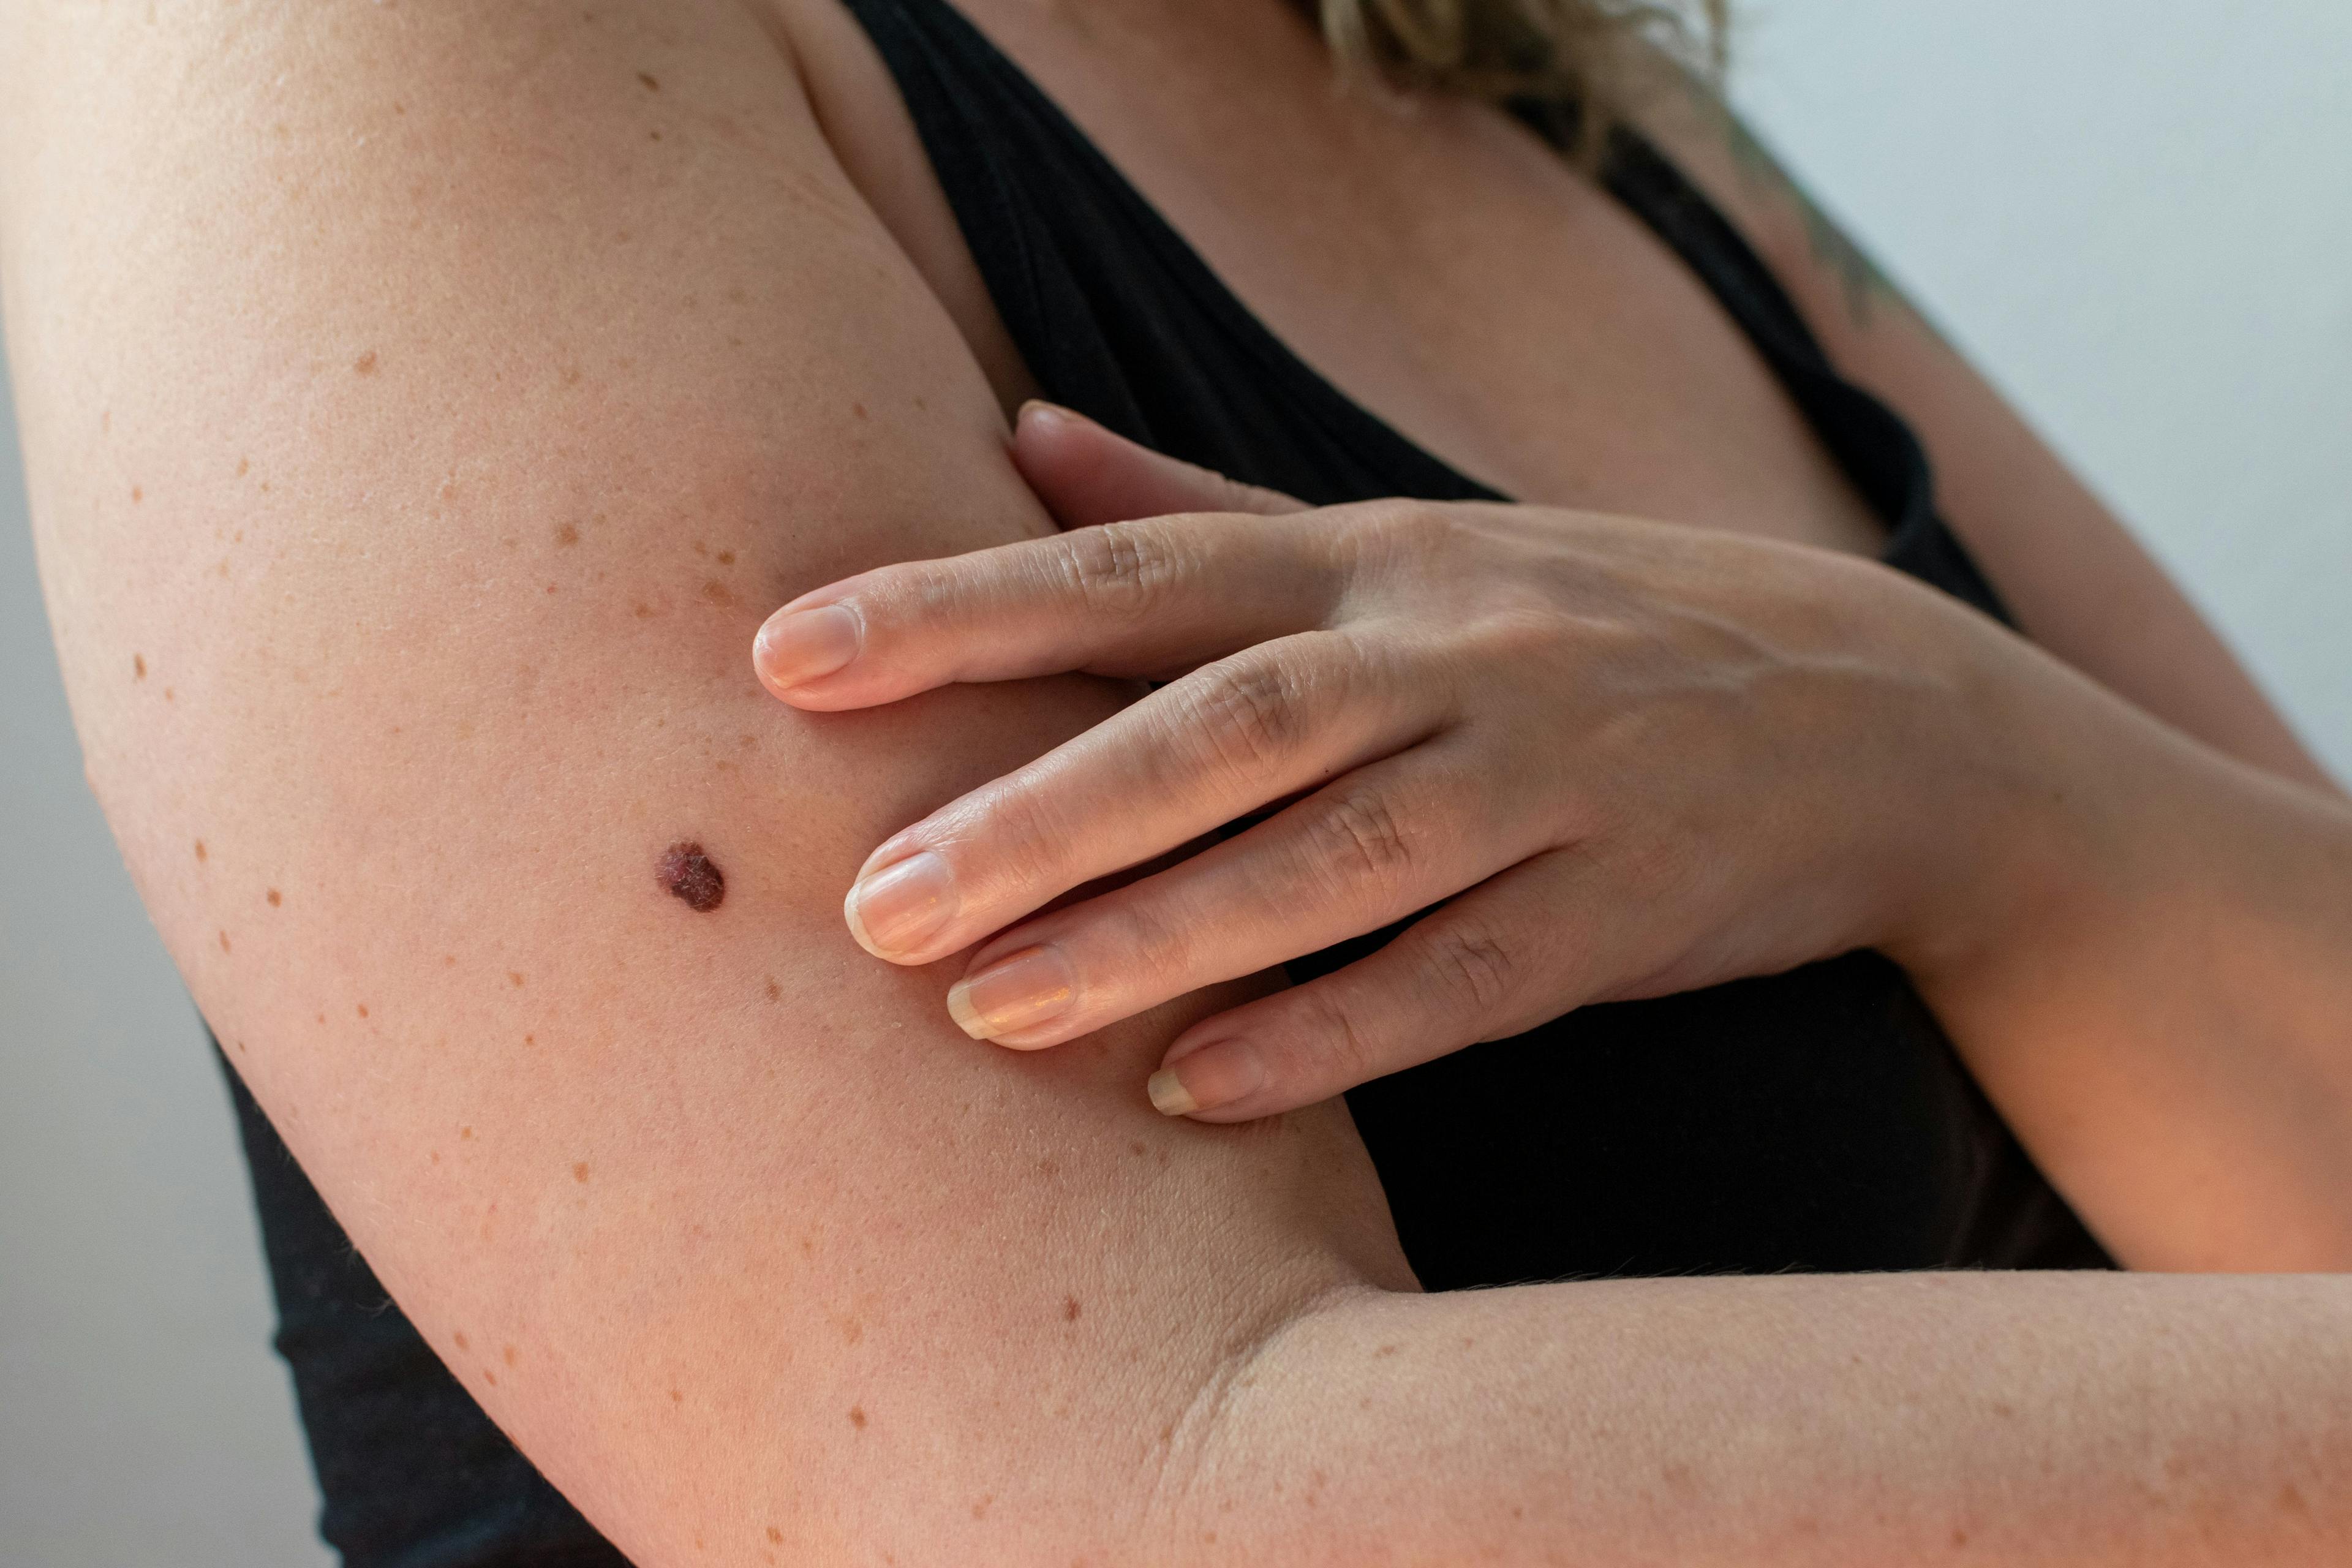 Woman Checking Skin for Signs of Melanoma | image credit: MW Photography - stock.adobe.com